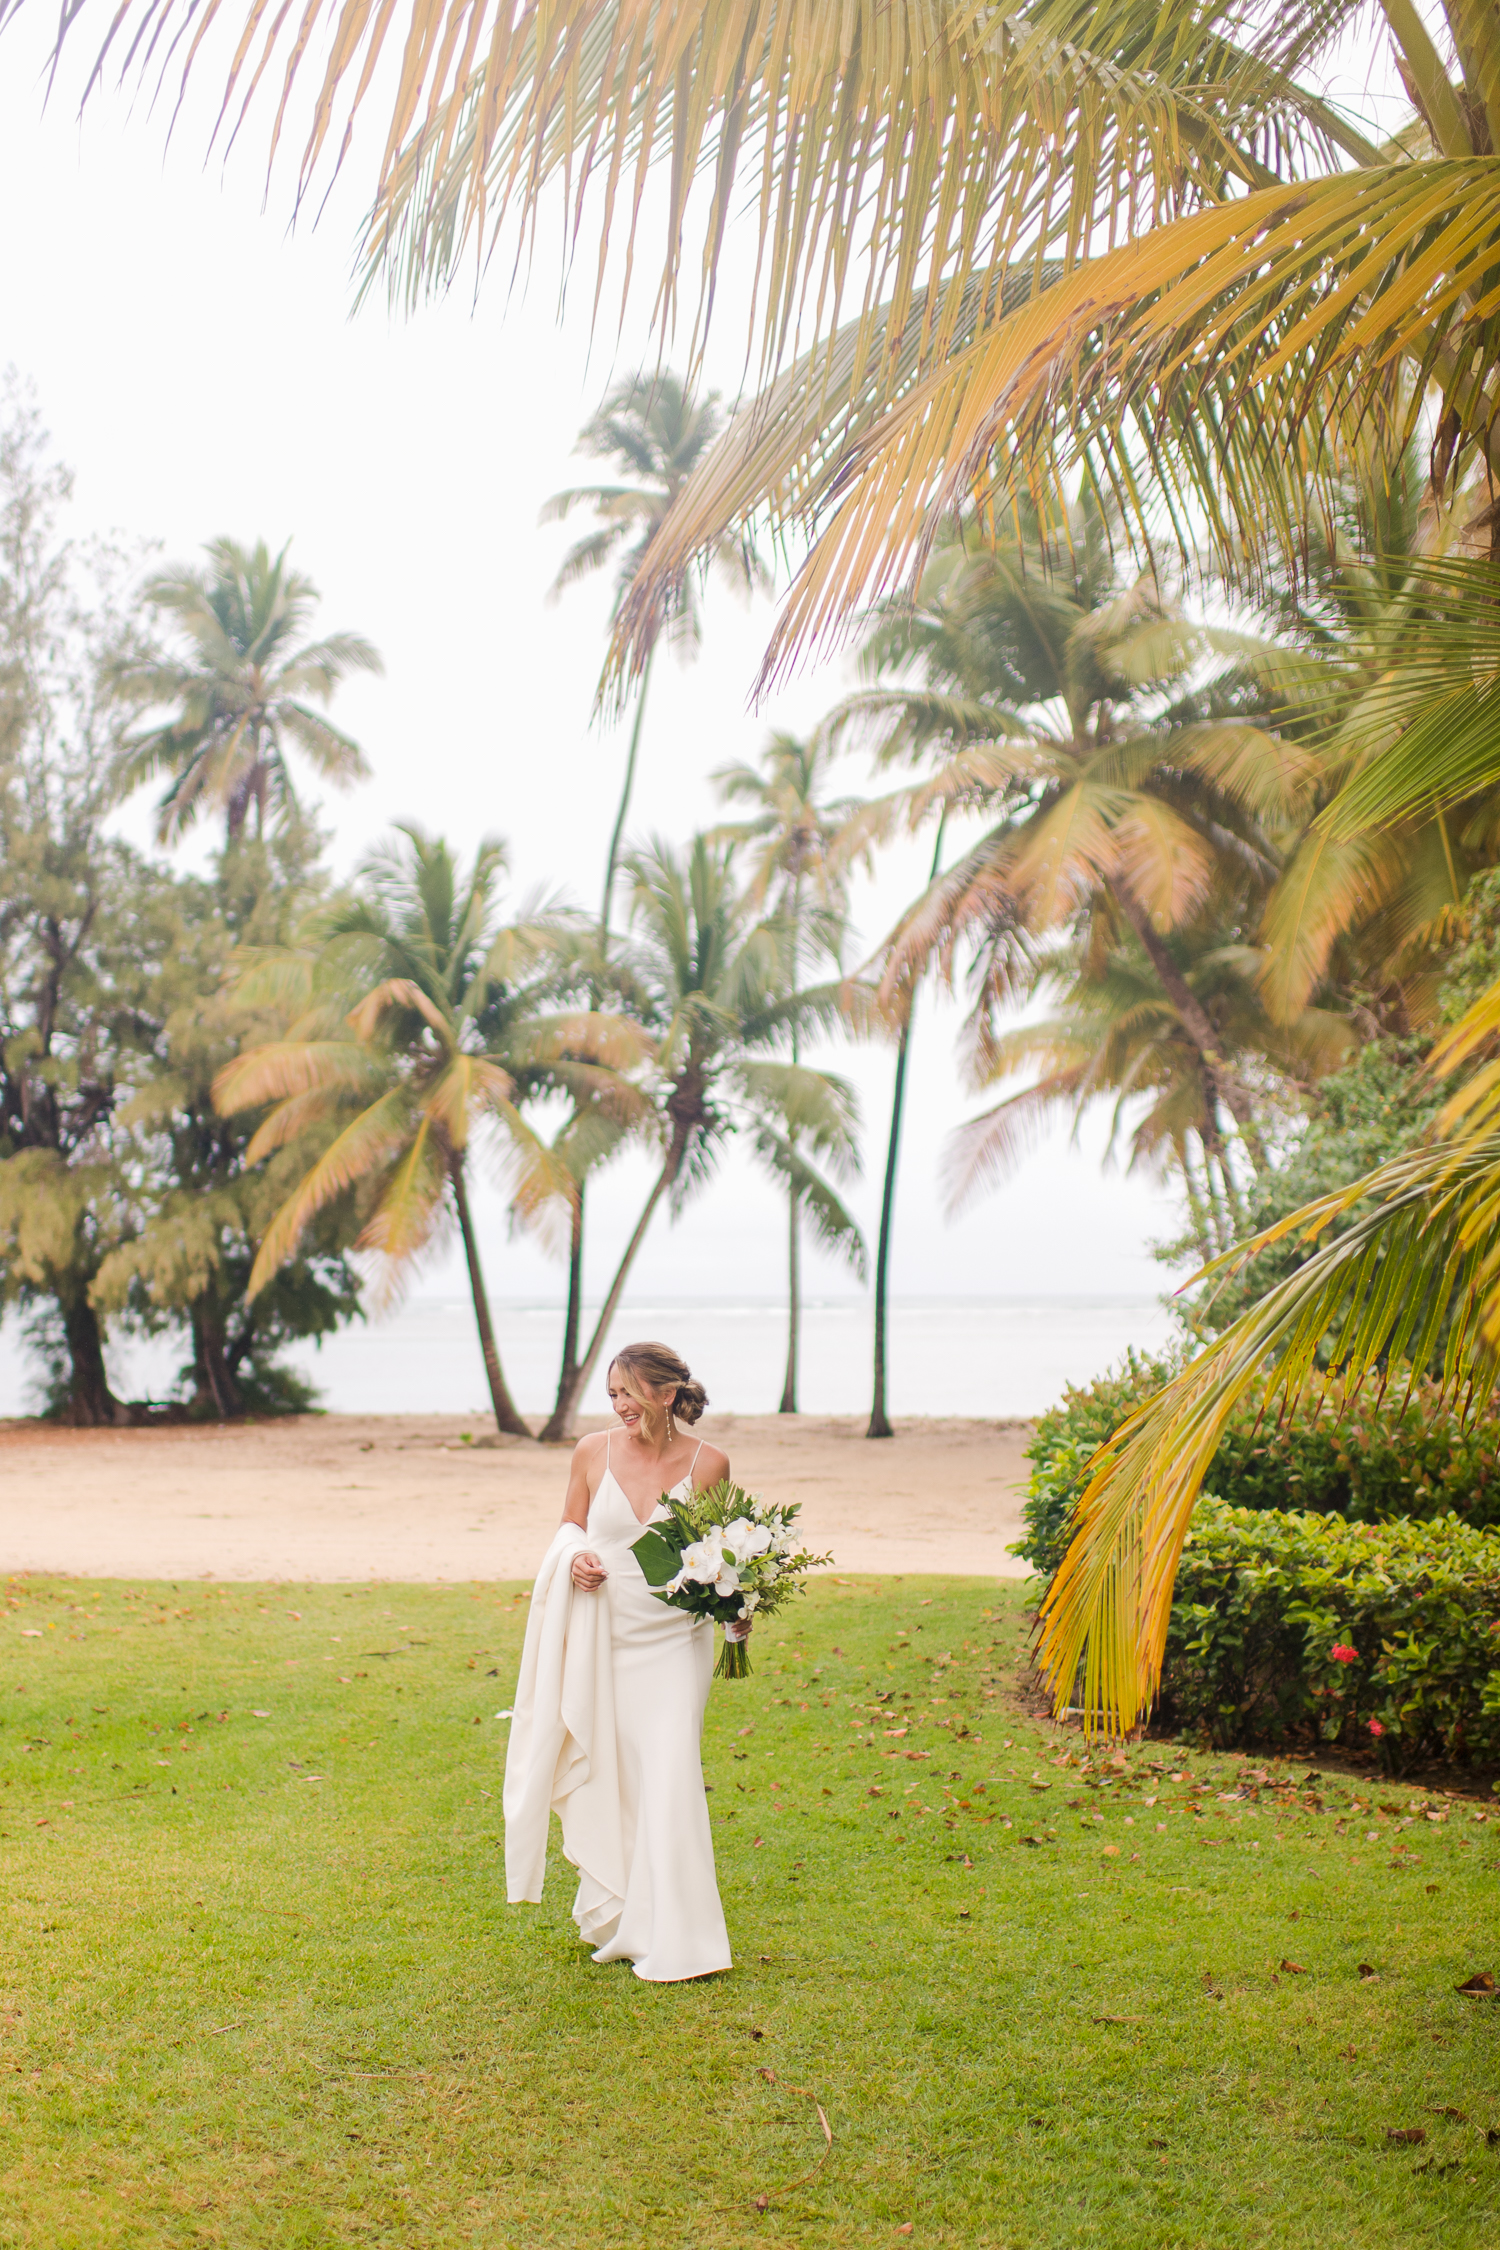 Make your wedding day unforgettable with stunning candid photography capturing all the special moments at Hyatt Regency Grand Reserve in Rio Grande, Puerto Rico